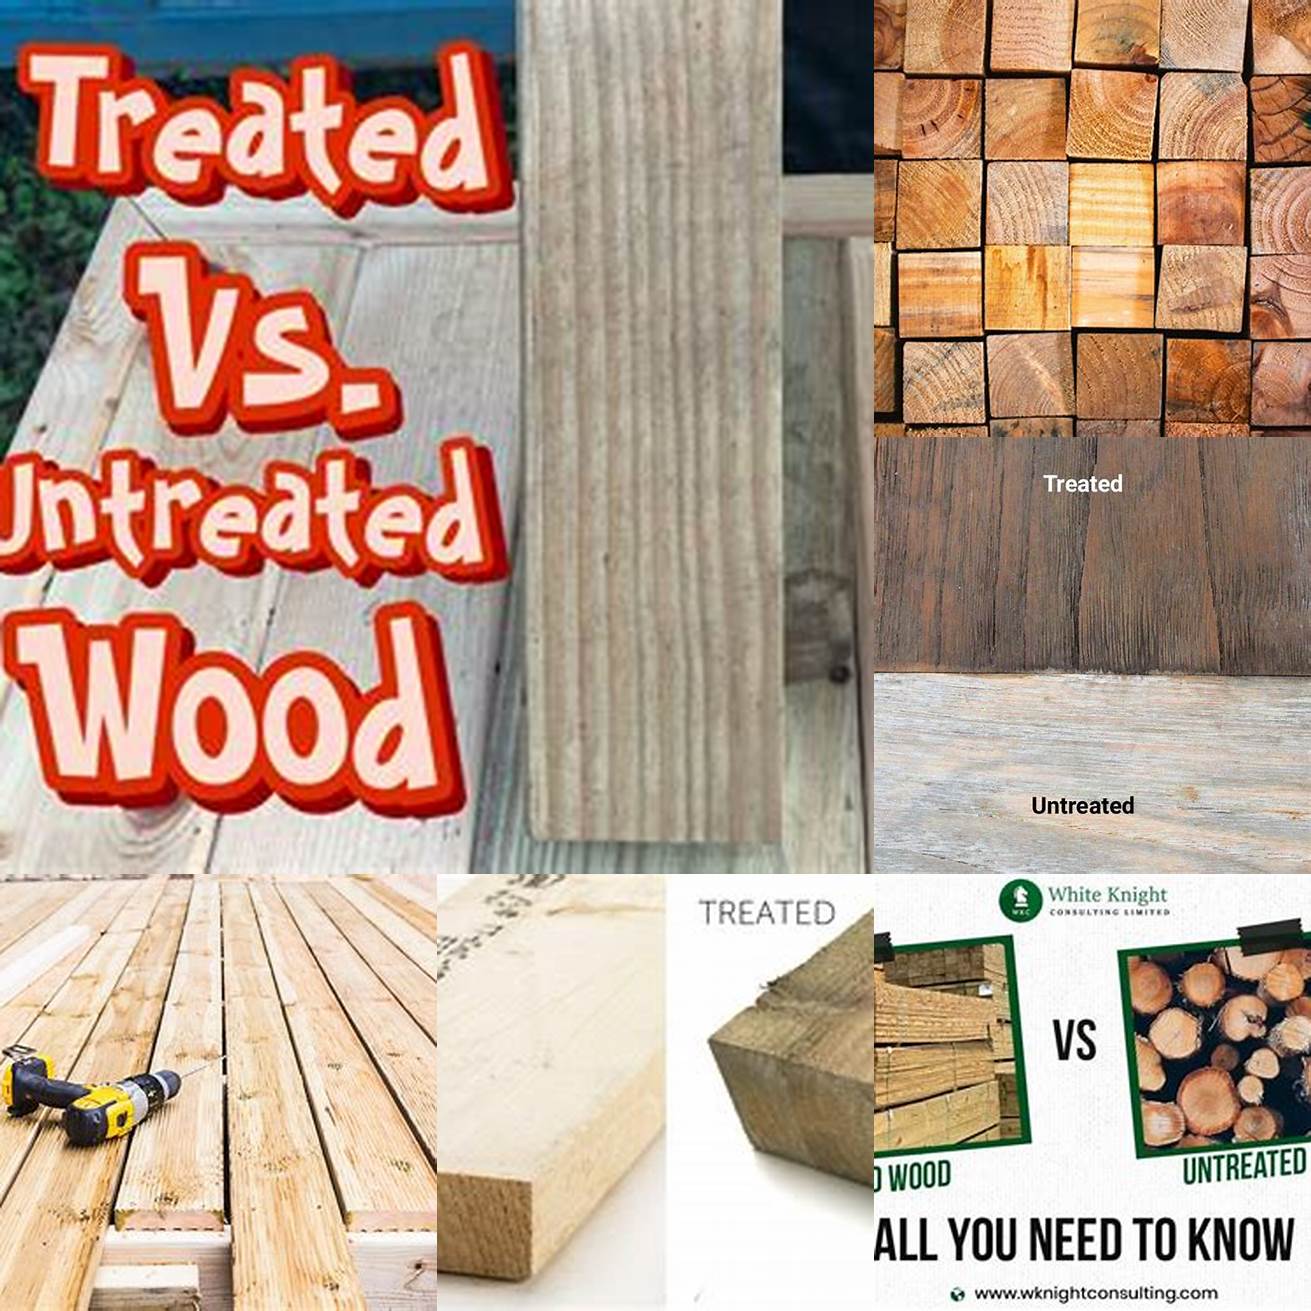 The difference between untreated and treated wood